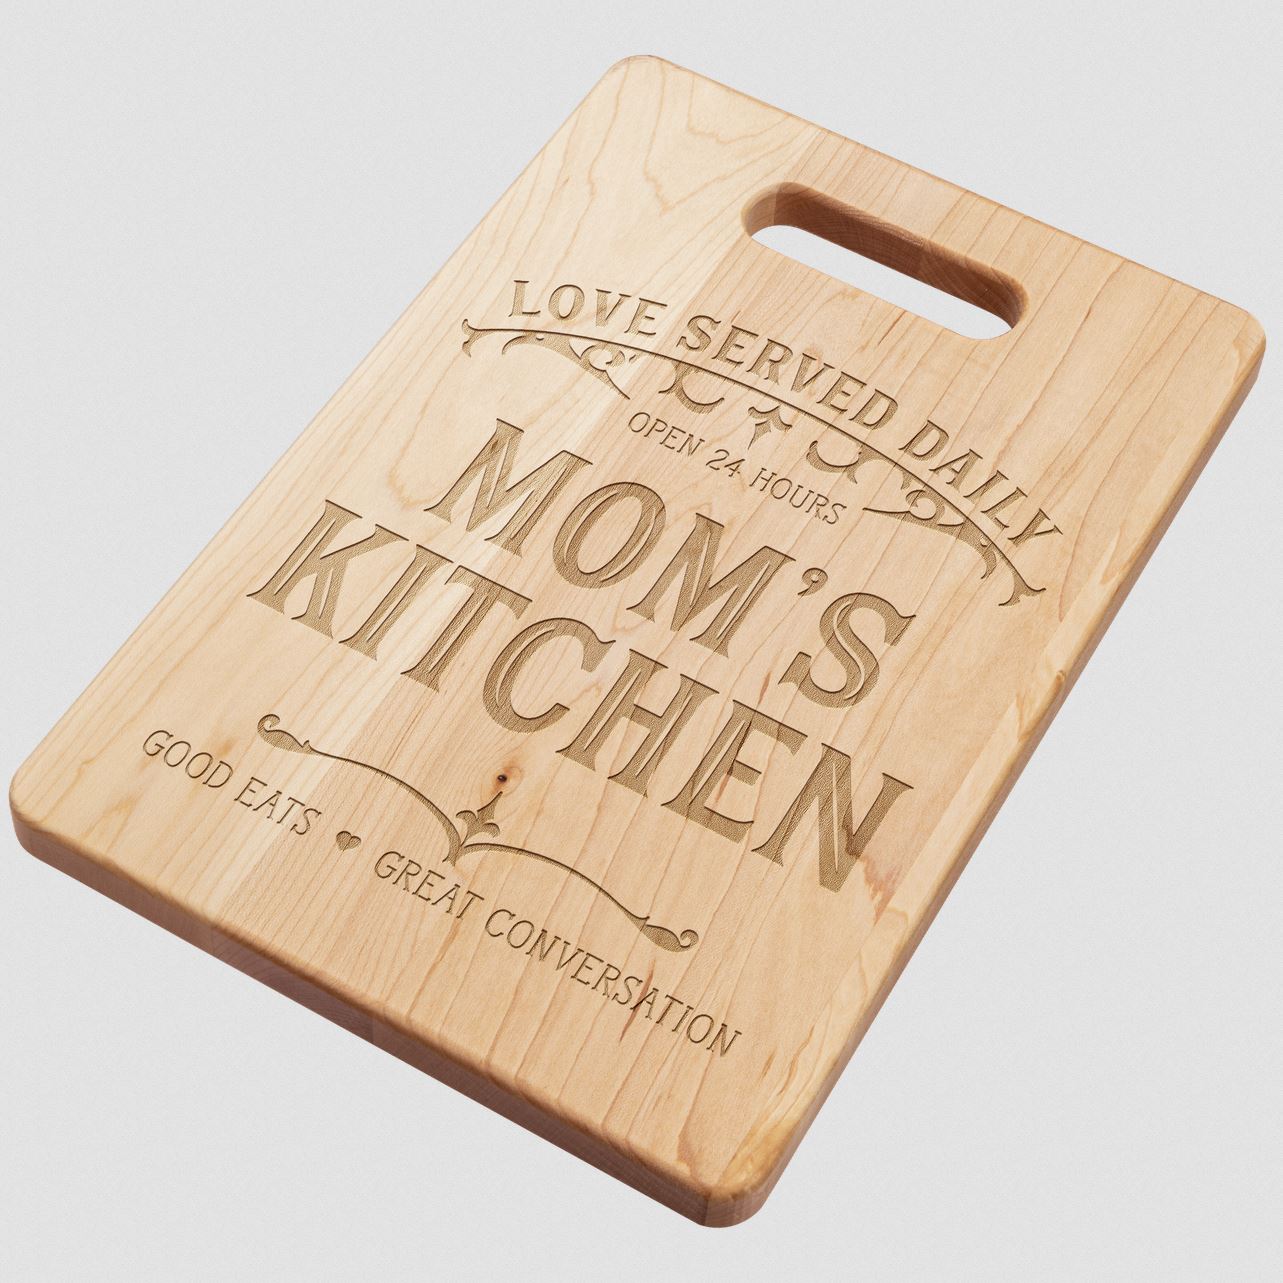 Personalized Cutting Board for Mom – Mom's Kitchen